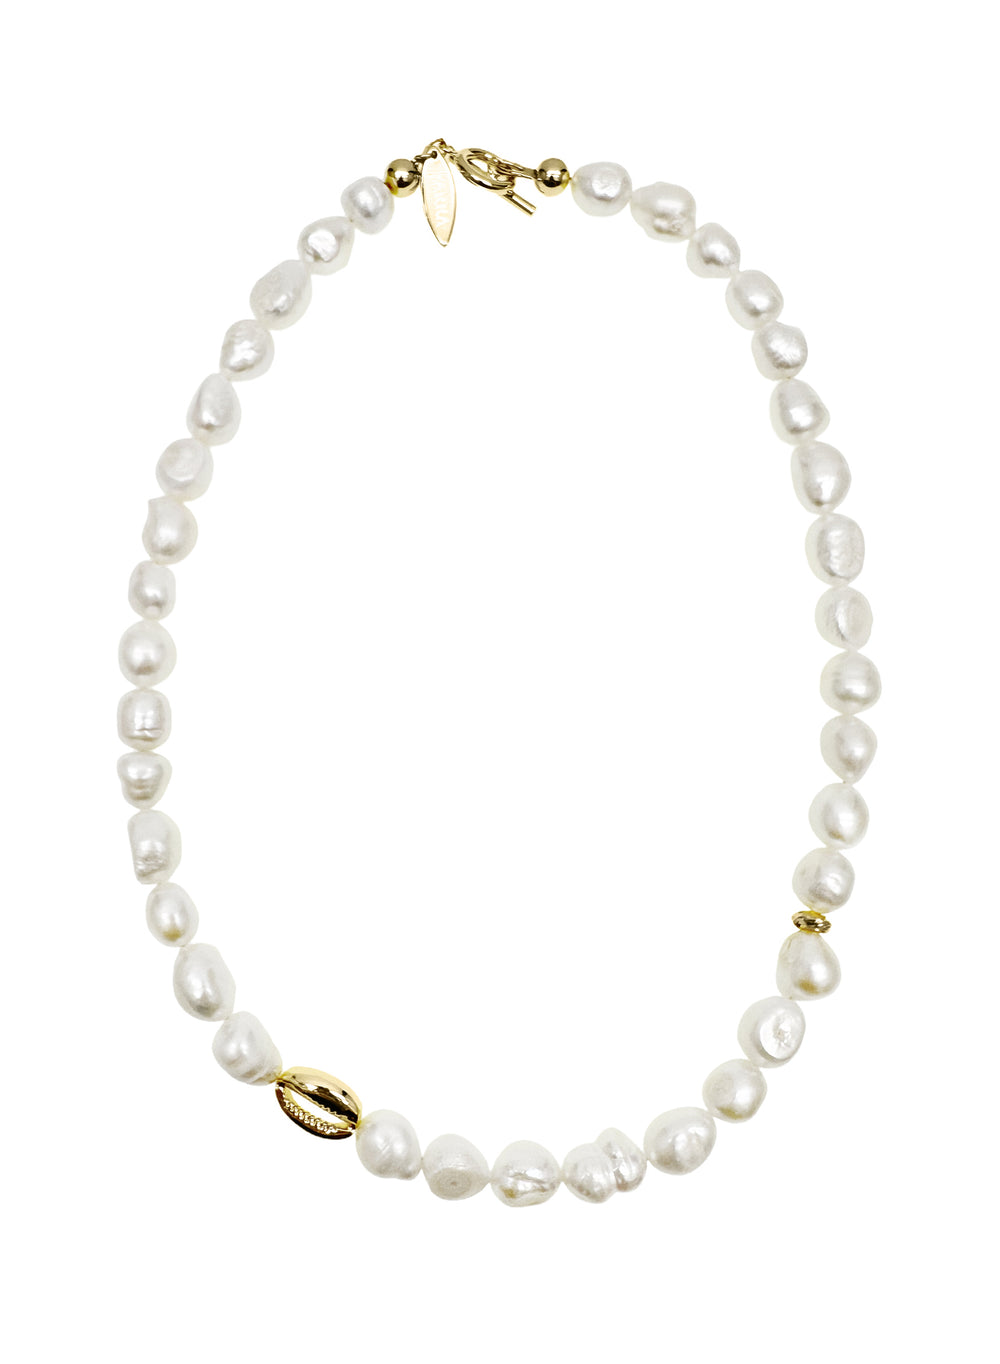 Irregular Freshwater Pearls with Gold Shell Charm Necklace LN055 - FARRA